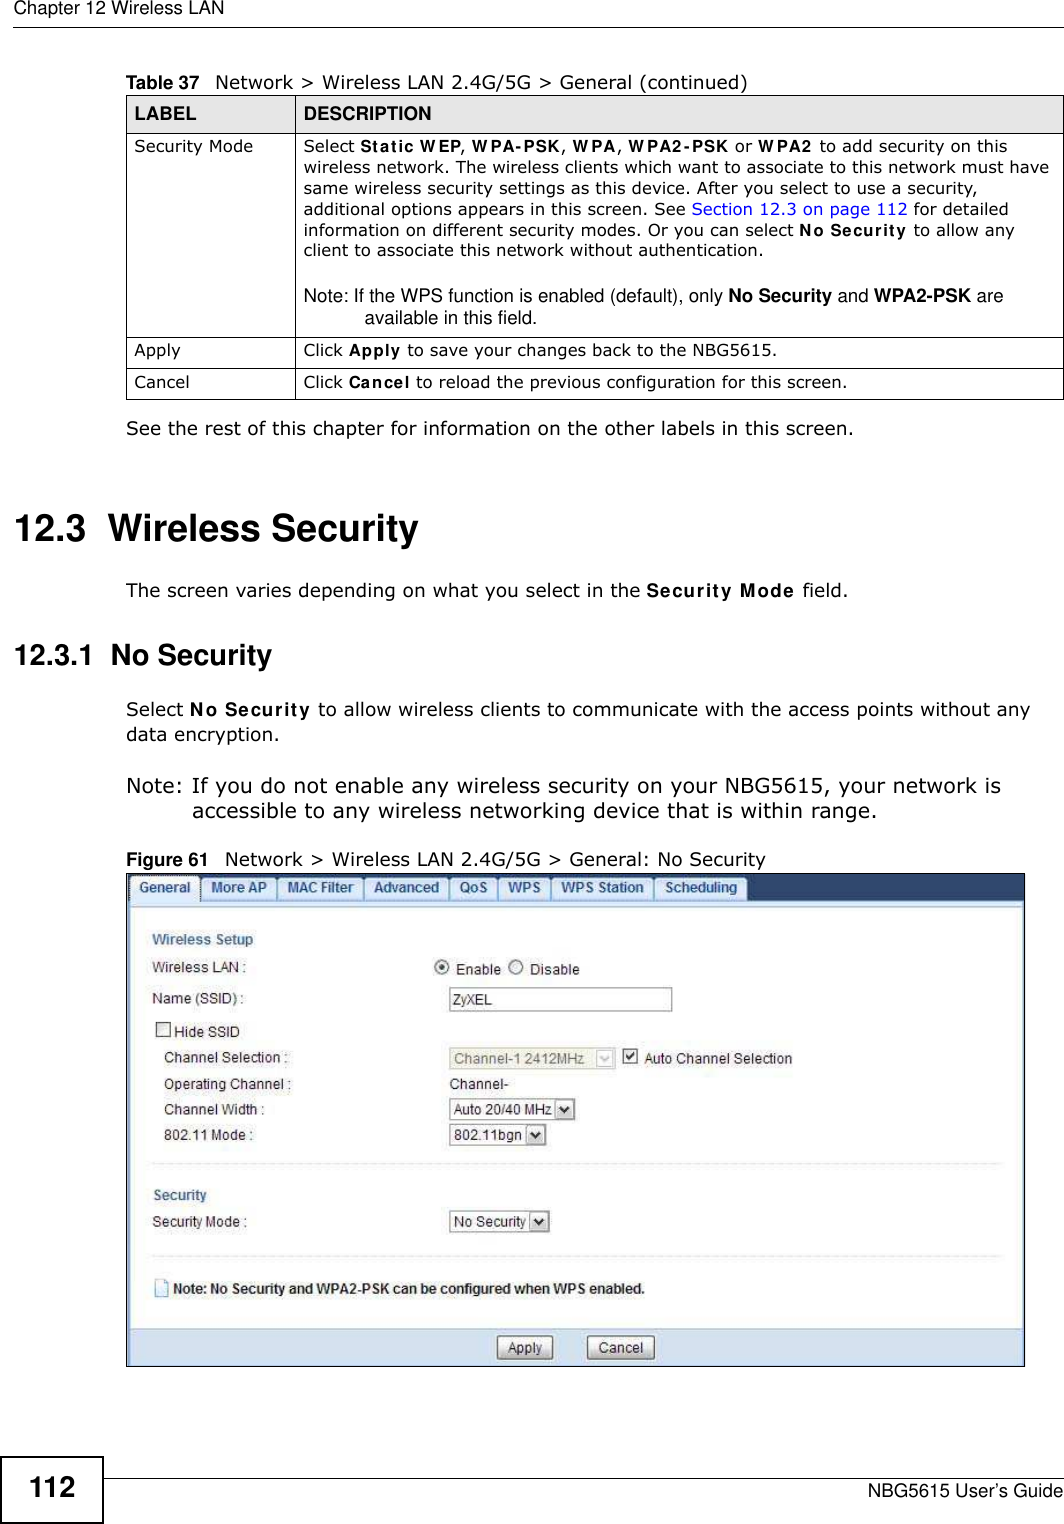 Chapter 12 Wireless LANNBG5615 User’s Guide112See the rest of this chapter for information on the other labels in this screen. 12.3  Wireless SecurityThe screen varies depending on what you select in the Security Mode field.12.3.1  No SecuritySelect No Security to allow wireless clients to communicate with the access points without any data encryption.Note: If you do not enable any wireless security on your NBG5615, your network is accessible to any wireless networking device that is within range.Figure 61   Network &gt; Wireless LAN 2.4G/5G &gt; General: No SecuritySecurity Mode Select Static W EP, W PA-PSK, W PA, W PA2 -PSK or W PA2  to add security on this wireless network. The wireless clients which want to associate to this network must have same wireless security settings as this device. After you select to use a security, additional options appears in this screen. See Section 12.3 on page 112 for detailed information on different security modes. Or you can select No Security to allow any client to associate this network without authentication.Note: If the WPS function is enabled (default), only No Security and WPA2-PSK are available in this field.Apply Click Apply to save your changes back to the NBG5615.Cancel Click Cancel to reload the previous configuration for this screen.Table 37   Network &gt; Wireless LAN 2.4G/5G &gt; General (continued)LABEL DESCRIPTION